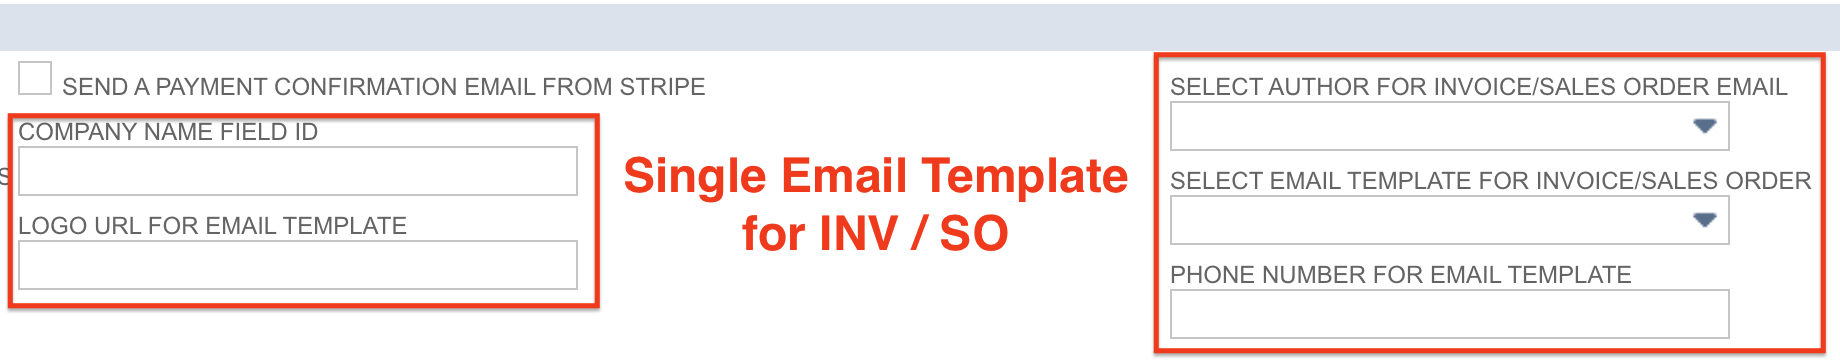 Email-Template.png